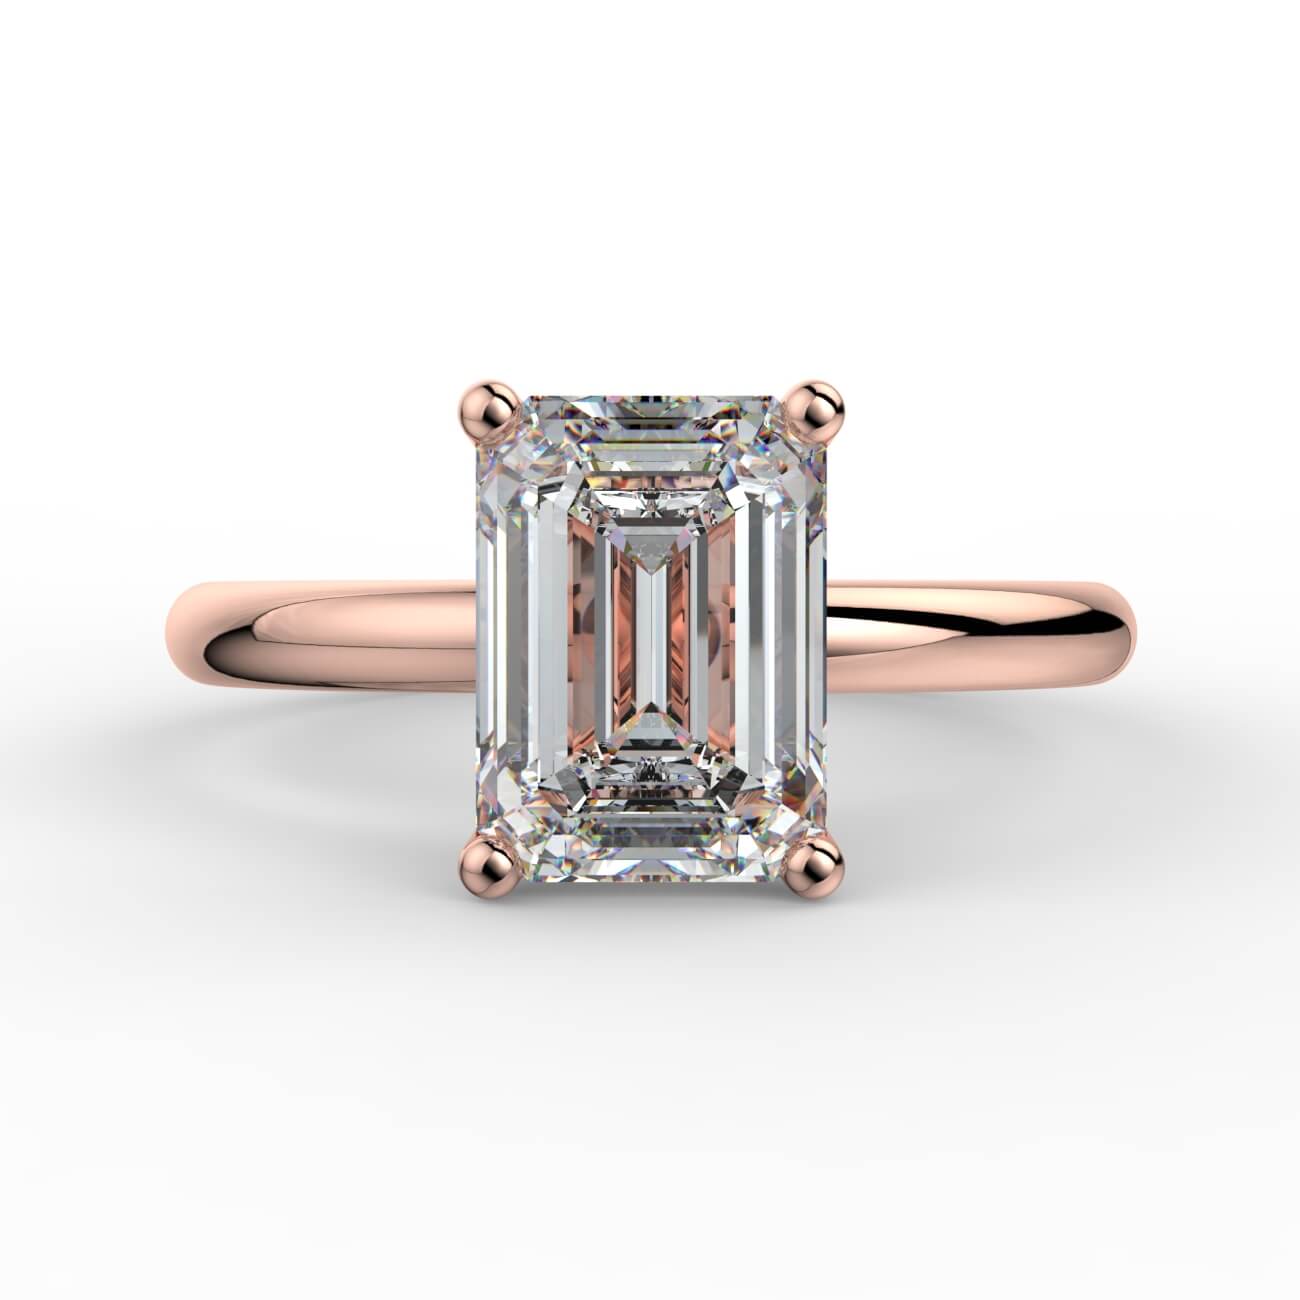 Comfort fit 4 claw emerald cut solitaire diamond ring in rose gold – Australian Diamond Network